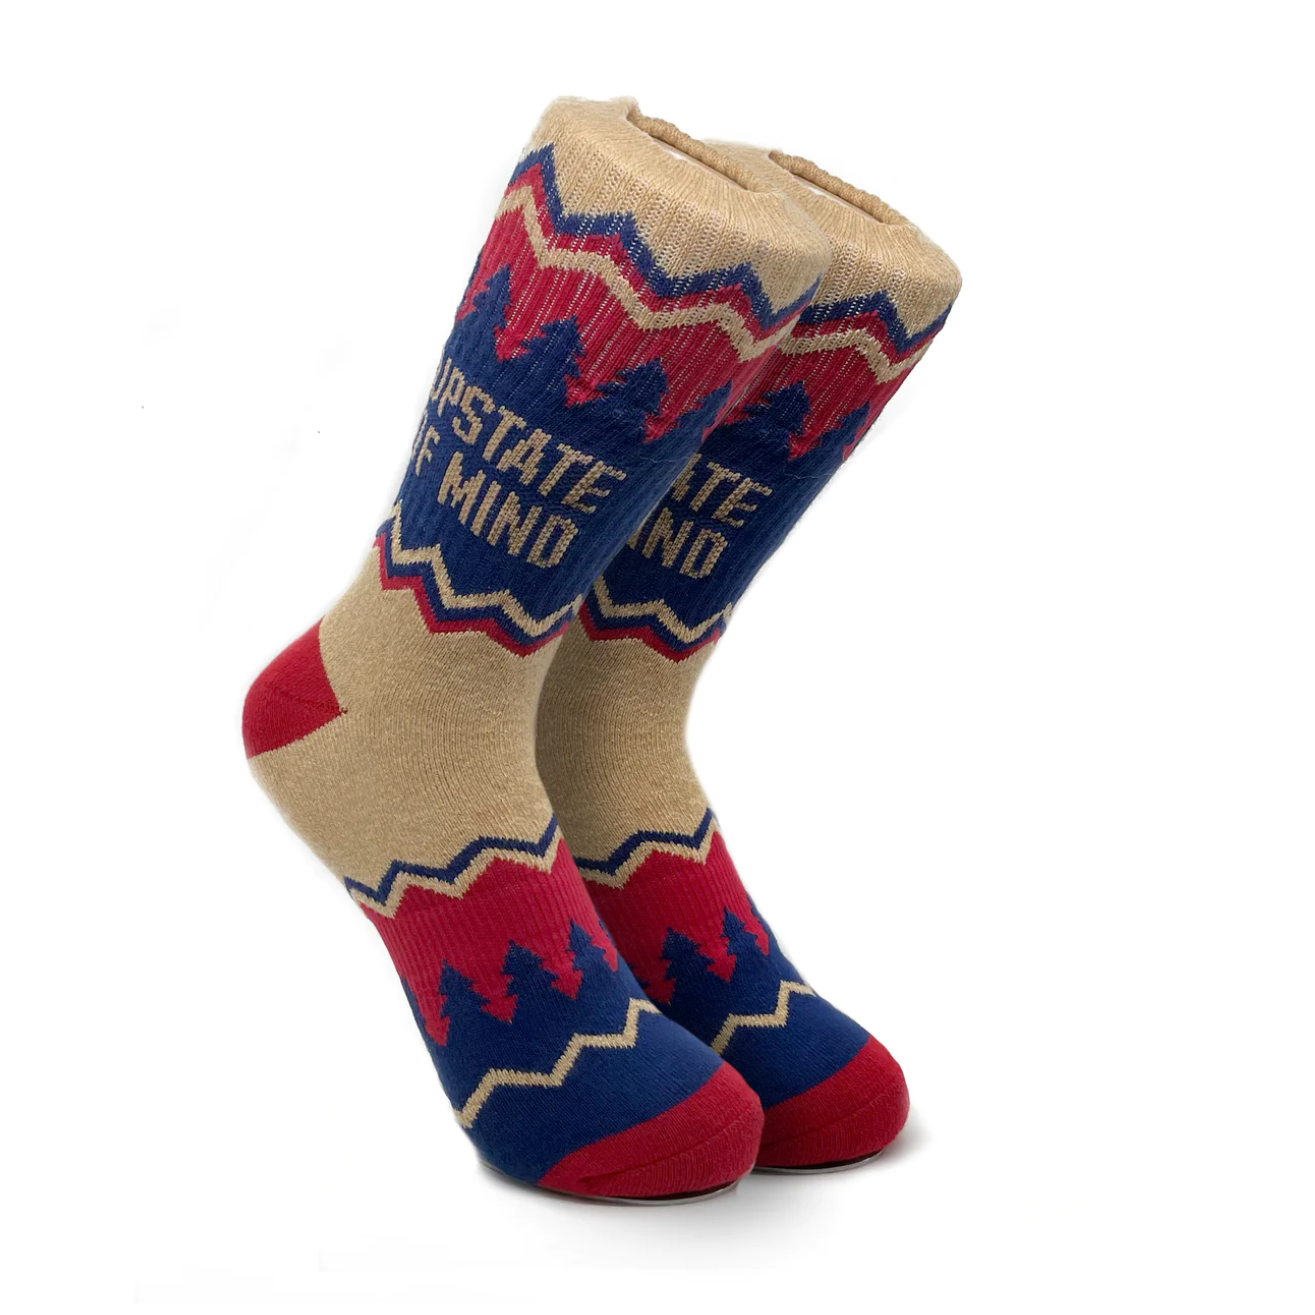 Blue Mountain Socks by Upstate of Mind